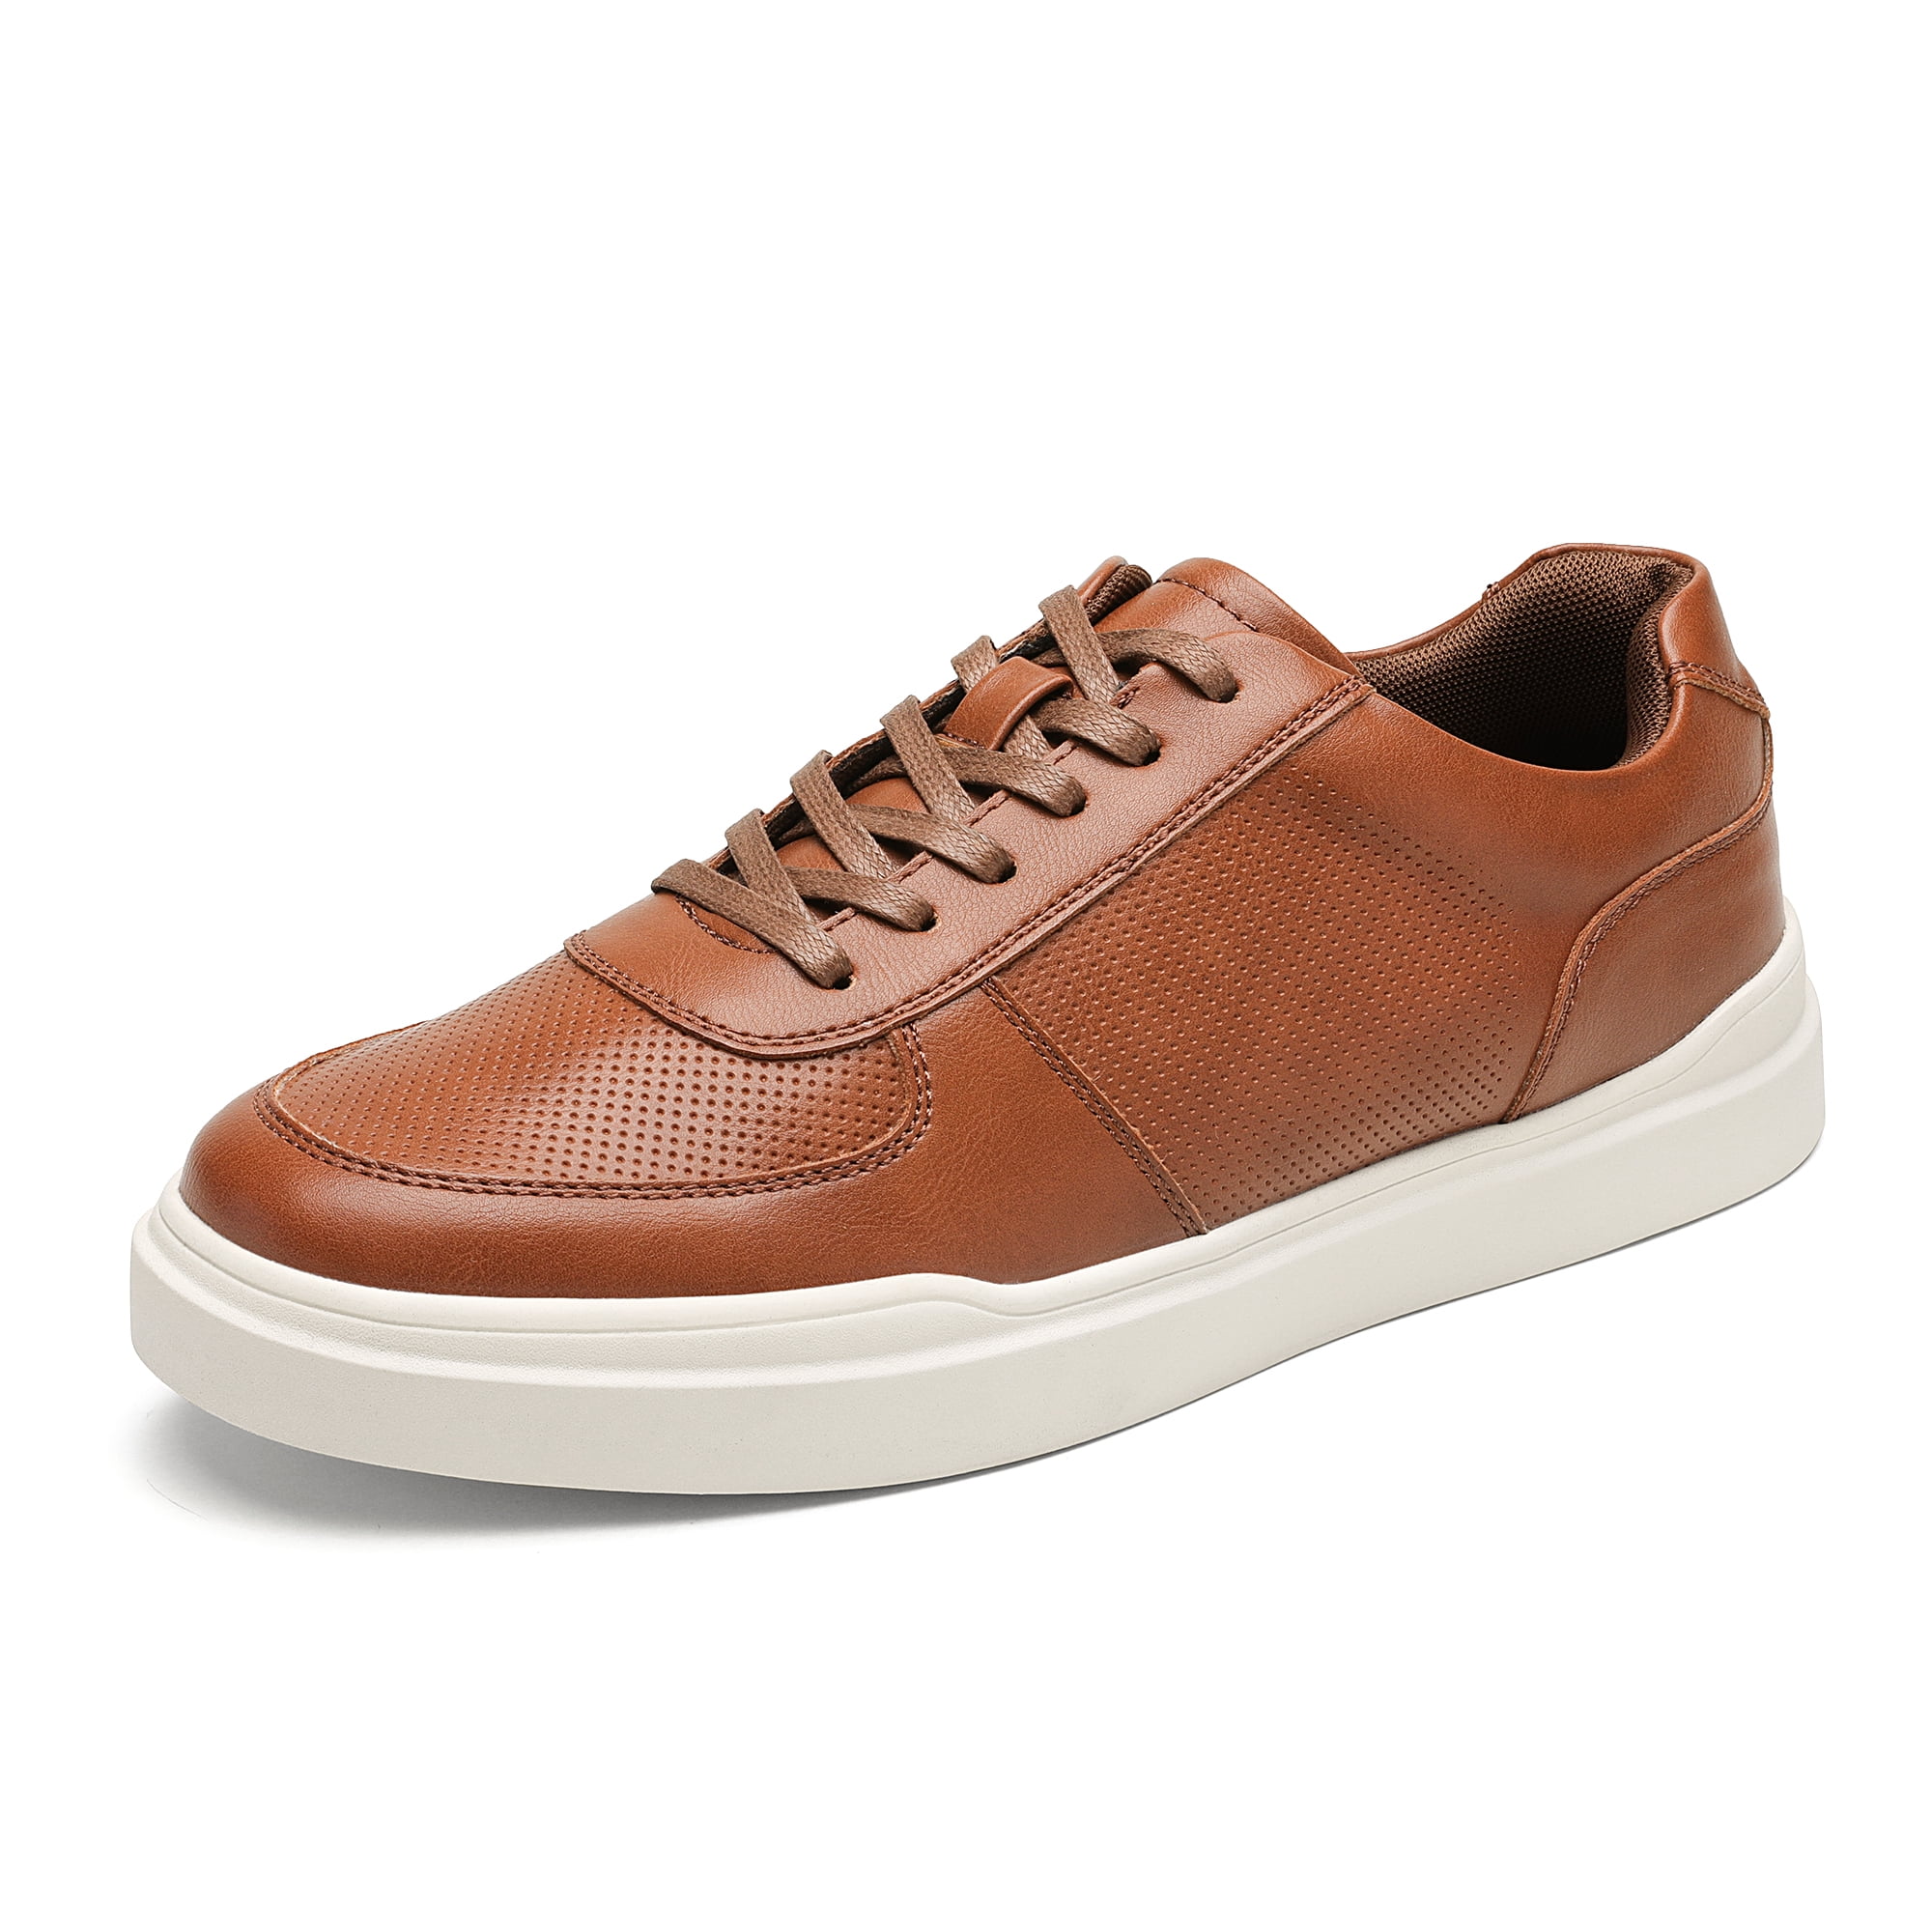 6 Best Casual Sneakers for Men for Daily Wear-Bruno Marc